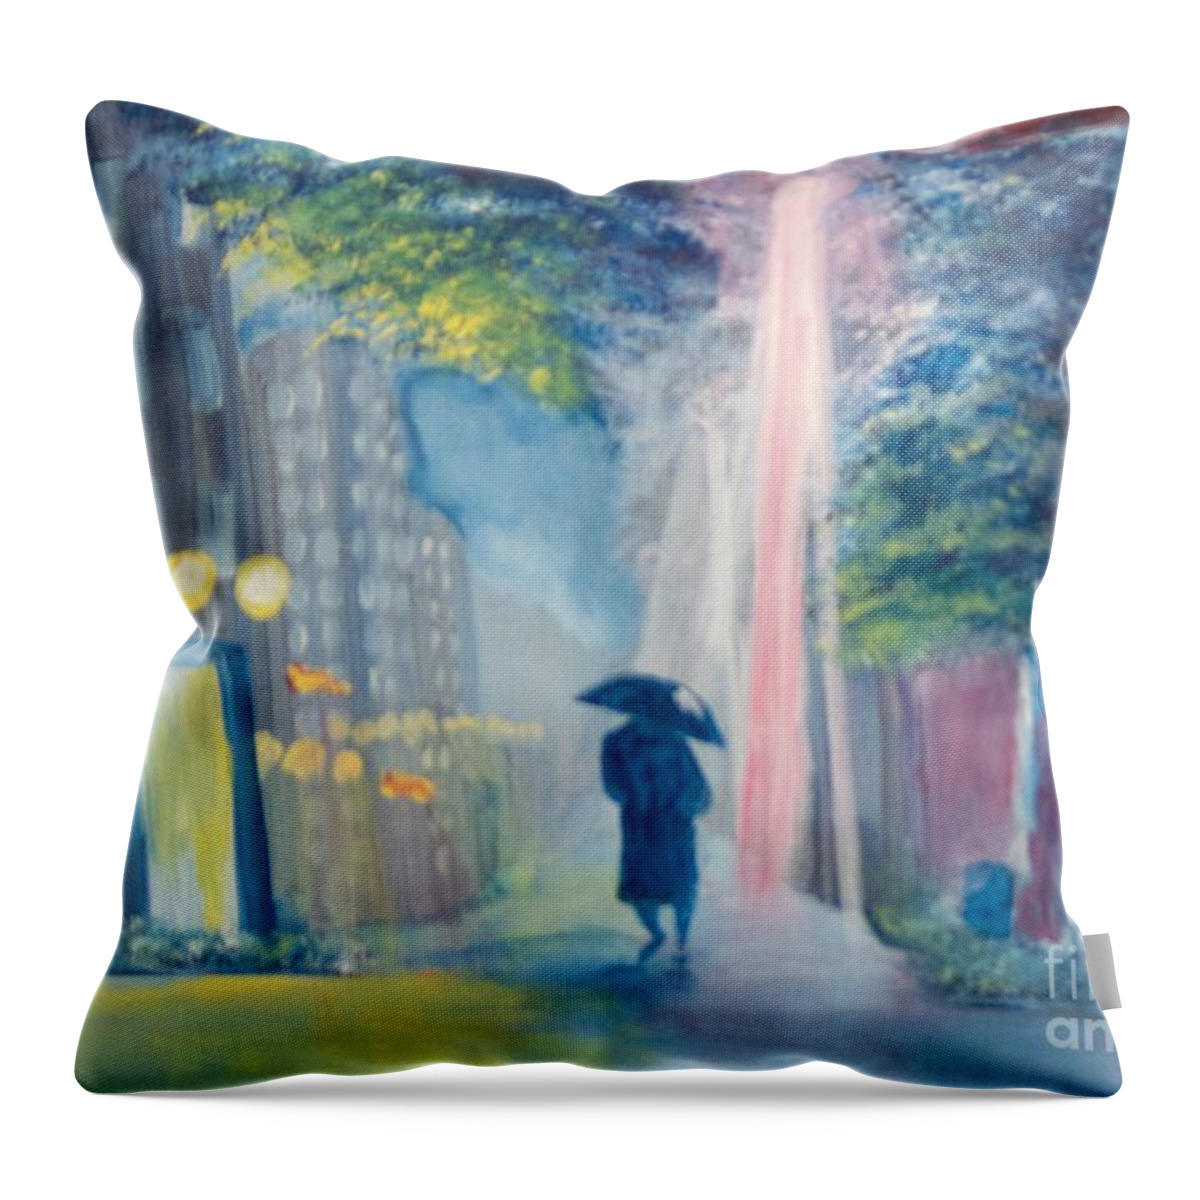 Cityscape Throw Pillow featuring the painting Alone by Saundra Johnson